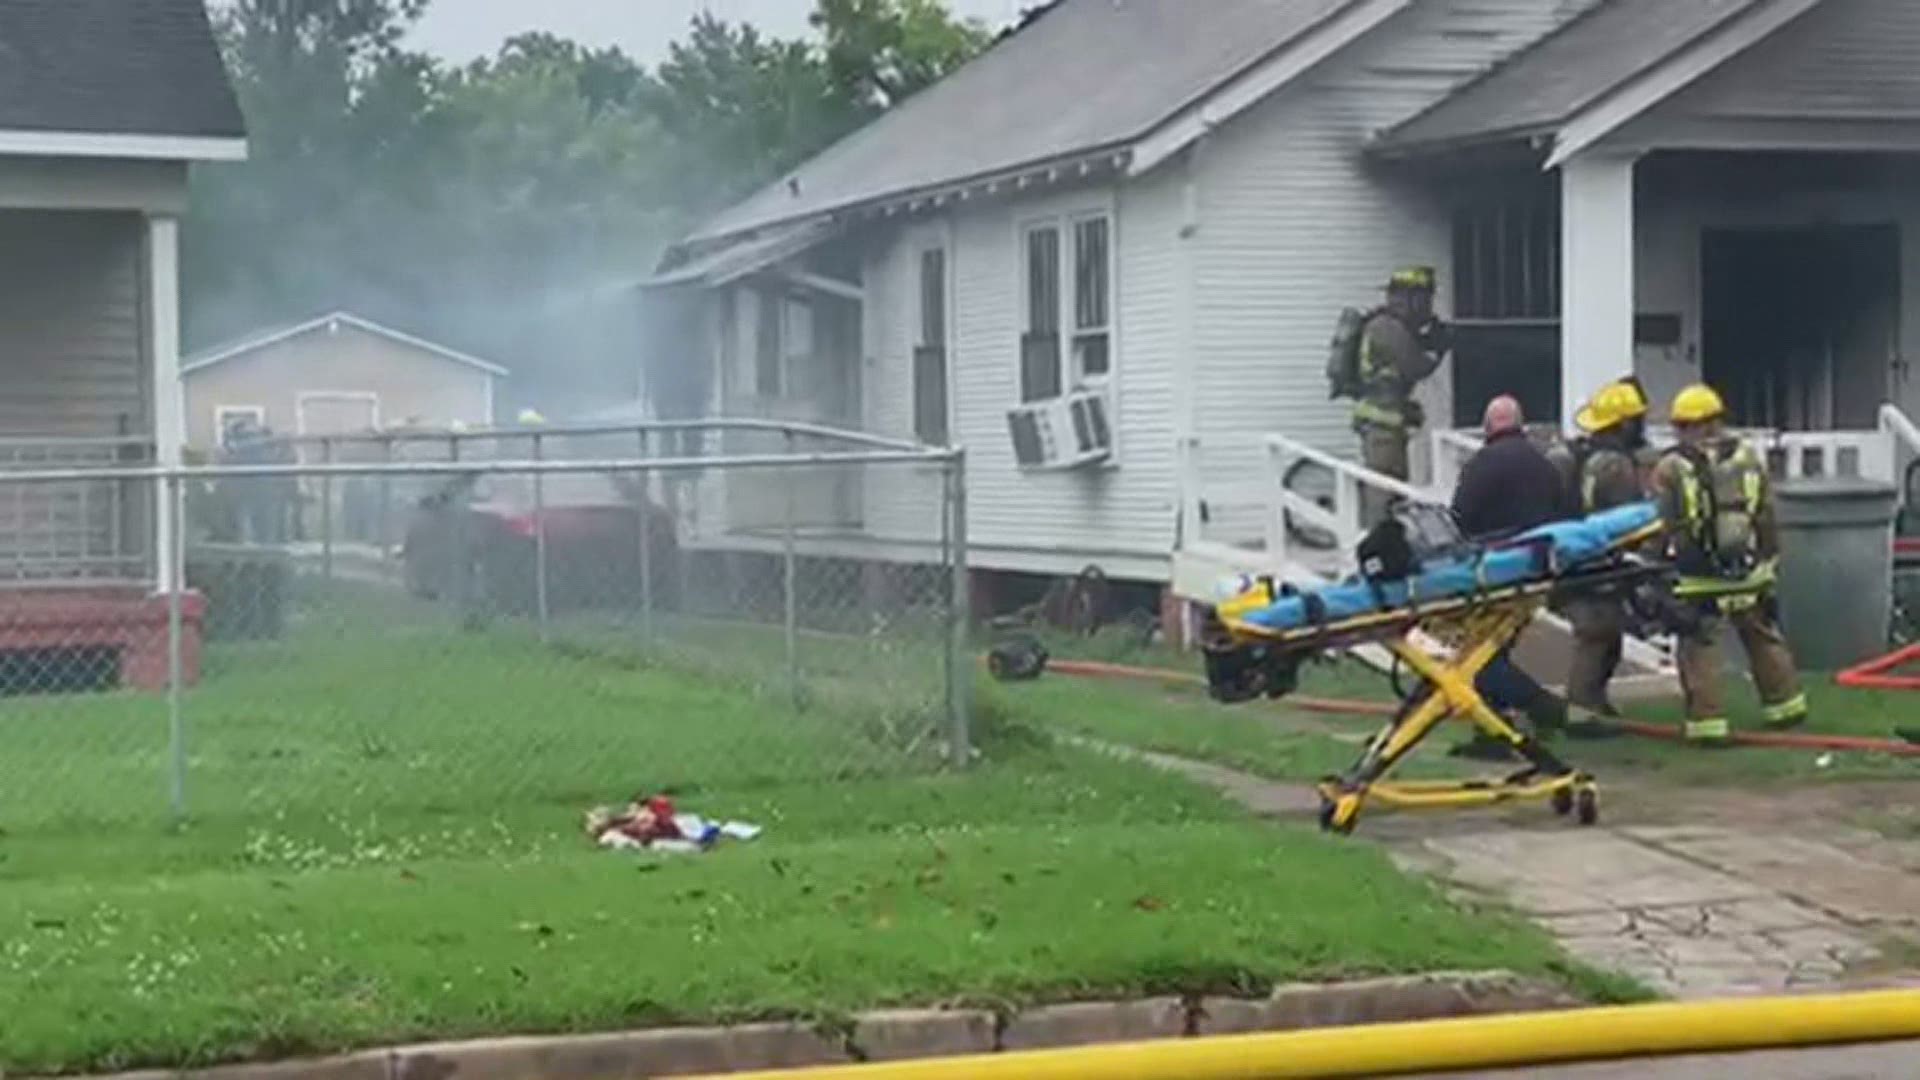 One of the men rescued from the fire was taken the hospital in critical condition.